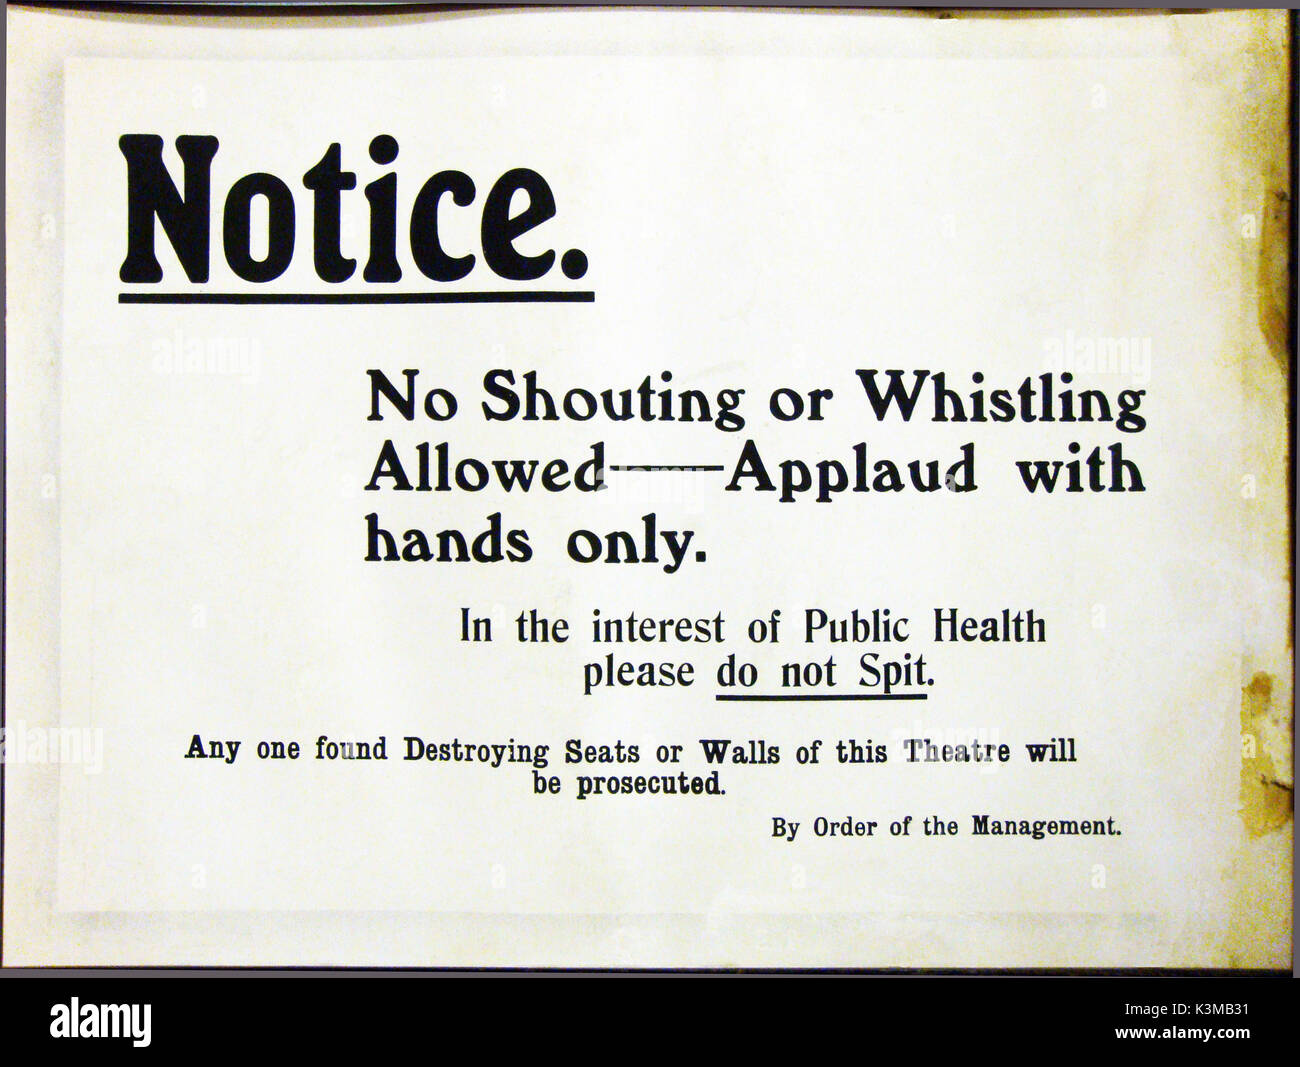 CINEMA NOTICE NO SHOUTING OR WHISTLING ALLOWED - APPLAUD WITH HANDS ONLY. iN THE INTEREST OF PUBLIC HEALTH, PLEASE DO NOT SPIT. This notice was displayed in and years later found in the loft of, the former BERVIE CINEMA, King Street, Inverbervie, a coastal village in Kincardineshire, which has since become part of Aberdeenshire. The main street cinema, in a former boot polish factory, opened in 1914. Closed in 1957 then was reopened for several years. Finally used by the local butcher in which to make pork pies it was completely demolished and housing built on the site. Stock Photo